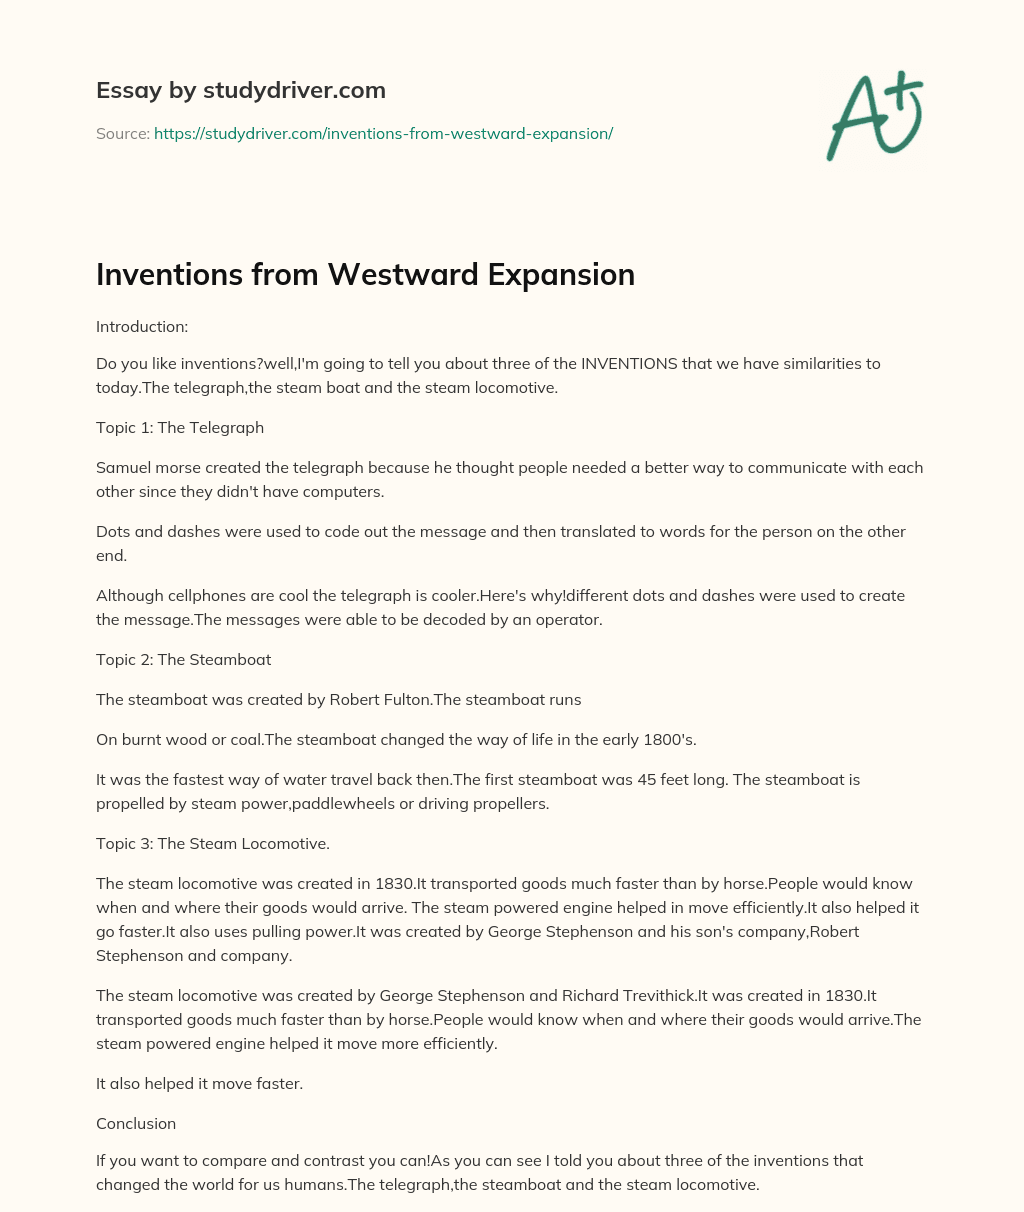 Inventions from Westward Expansion essay